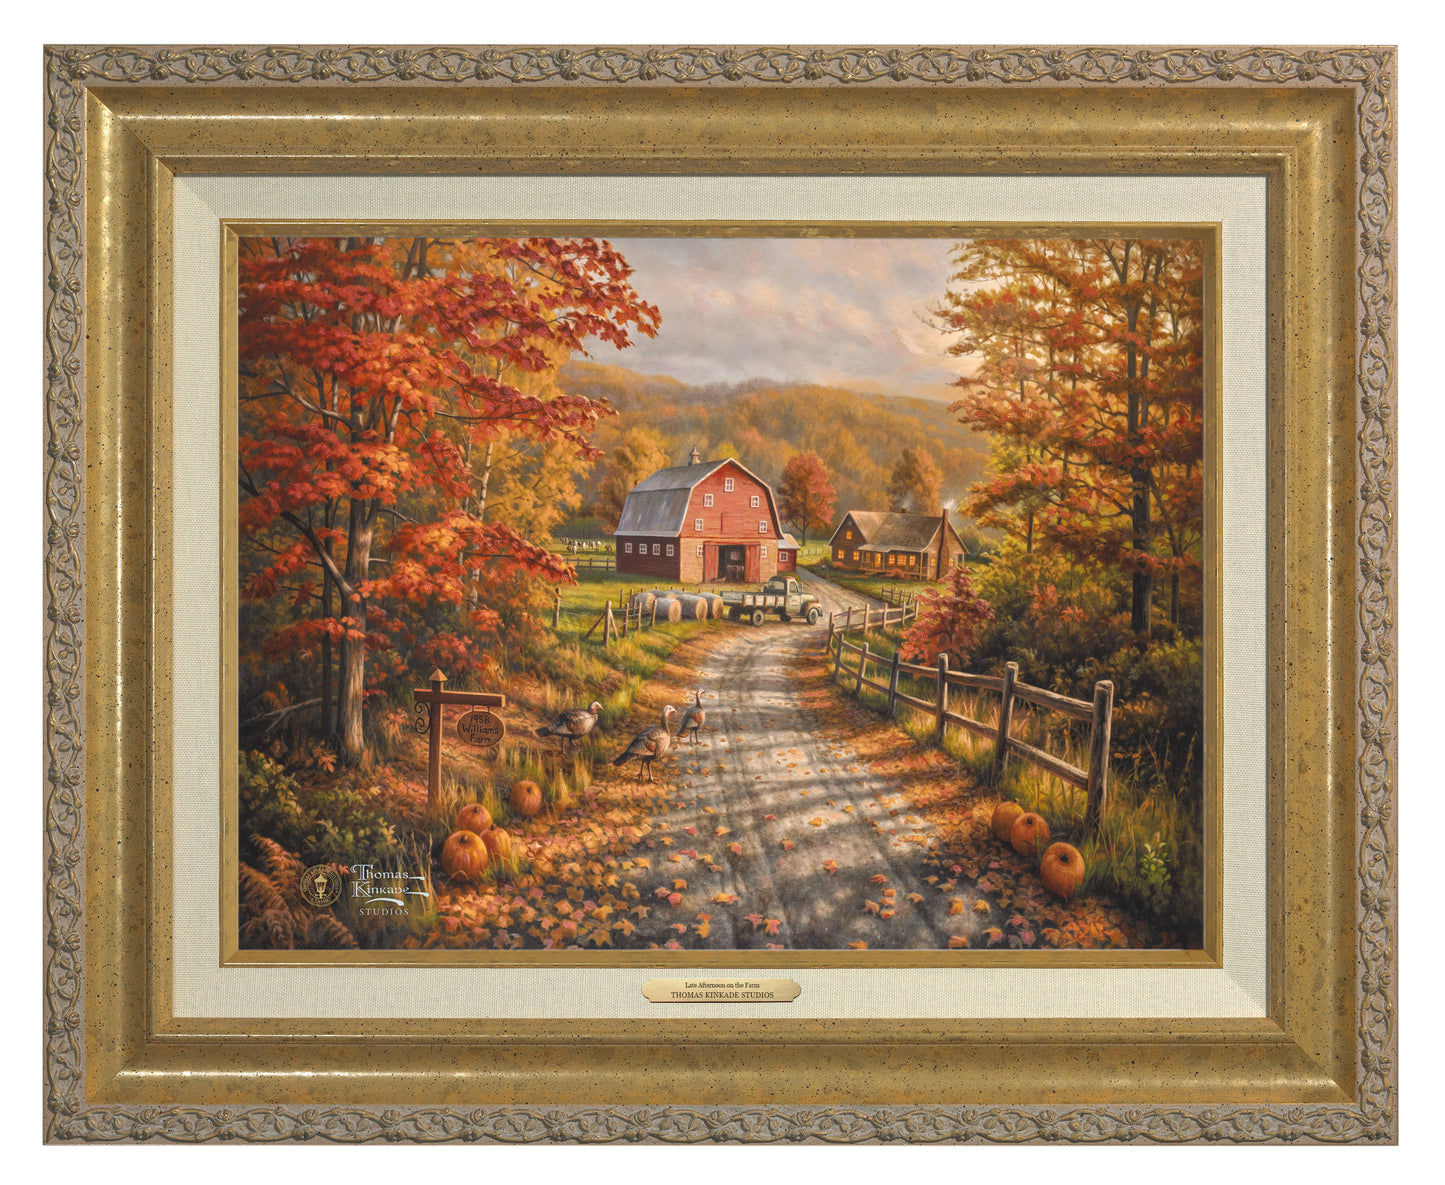 161457_CLF Late Afternoon on the Farm 12X16 Classic - Gold.jpg